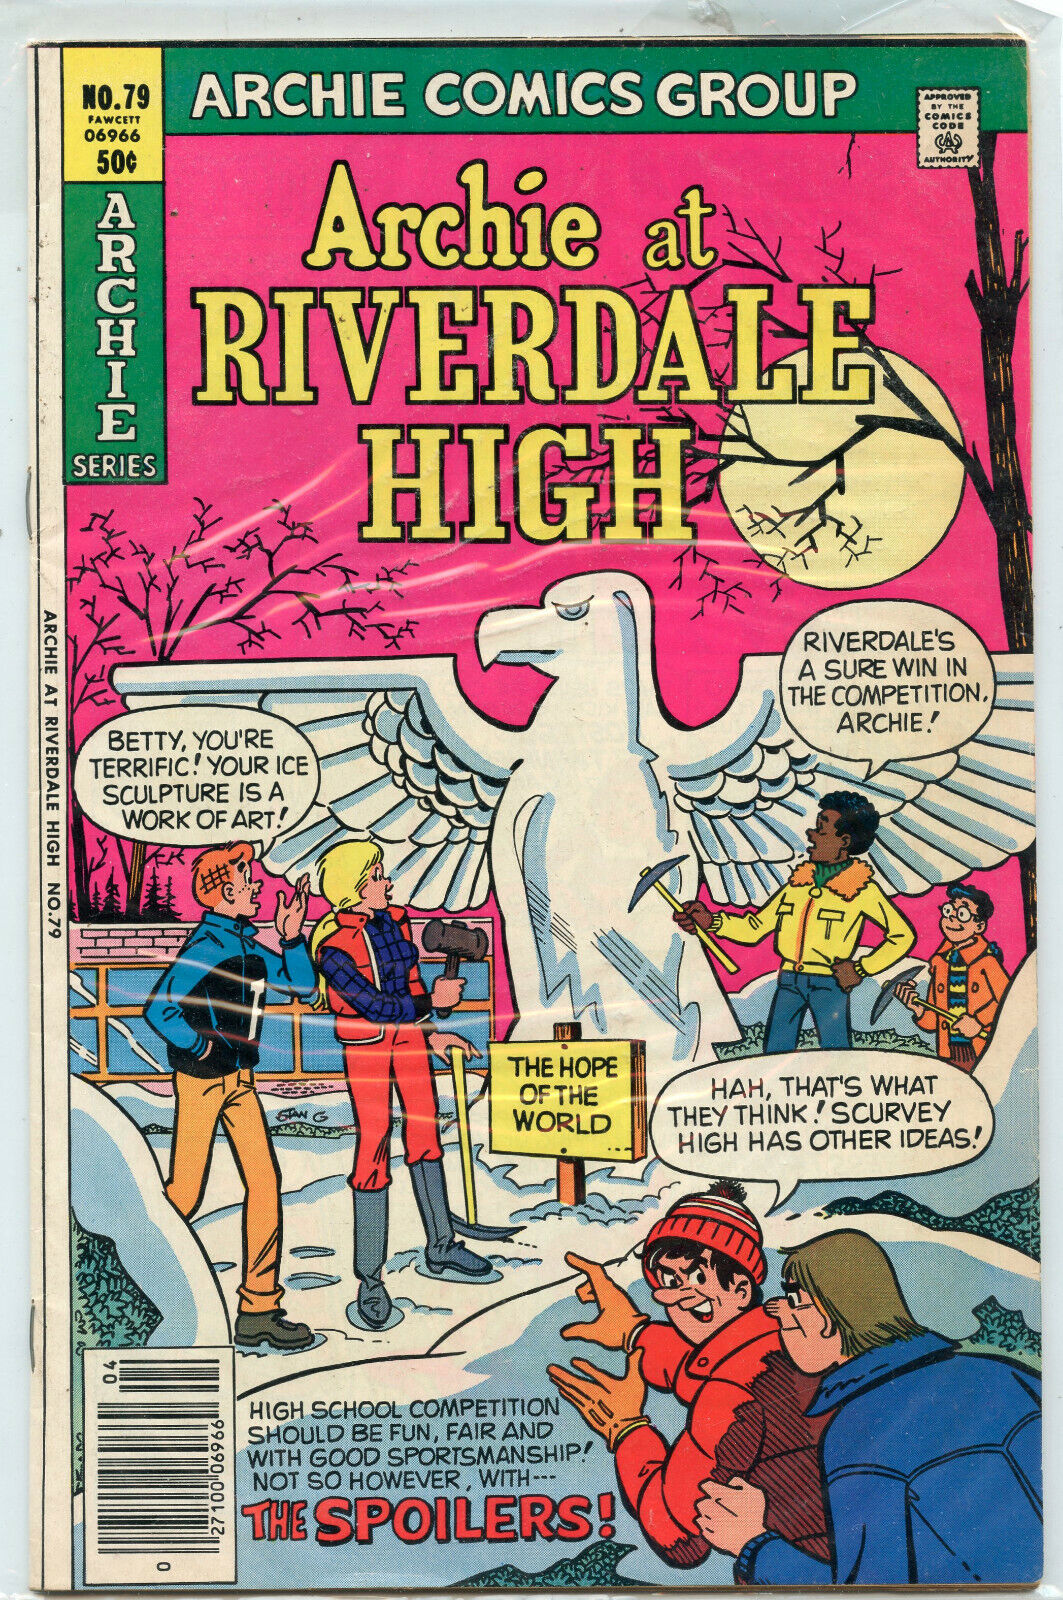 Archie at Riverdale #79